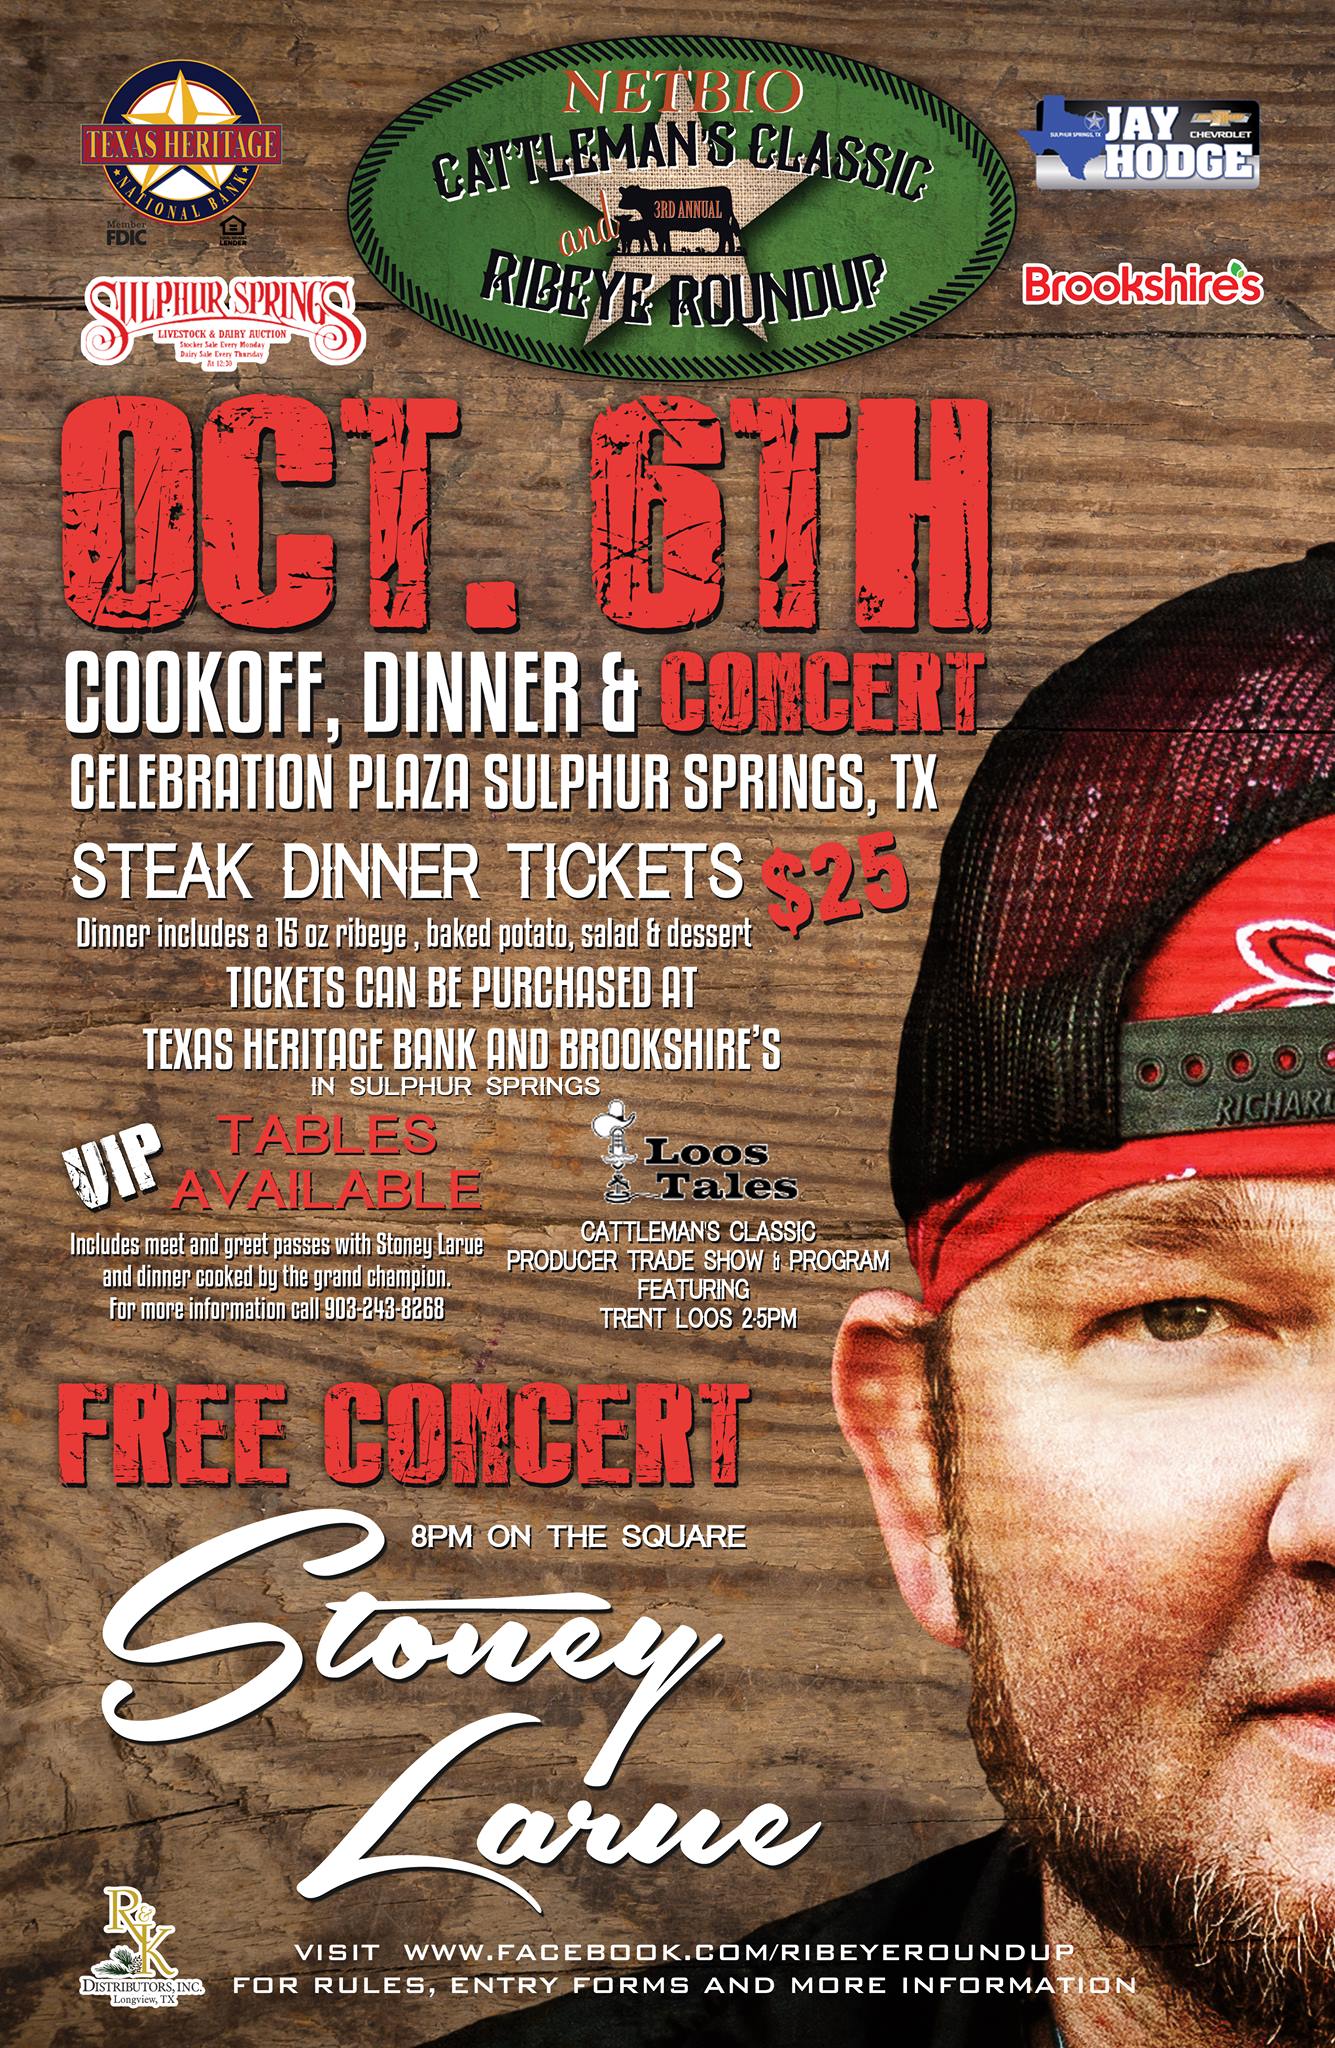 Stoney Larue Playing Concert at Downtown Sulphur Springs in October for NETBIO Cattleman’s Classic and Ribeye Roundup